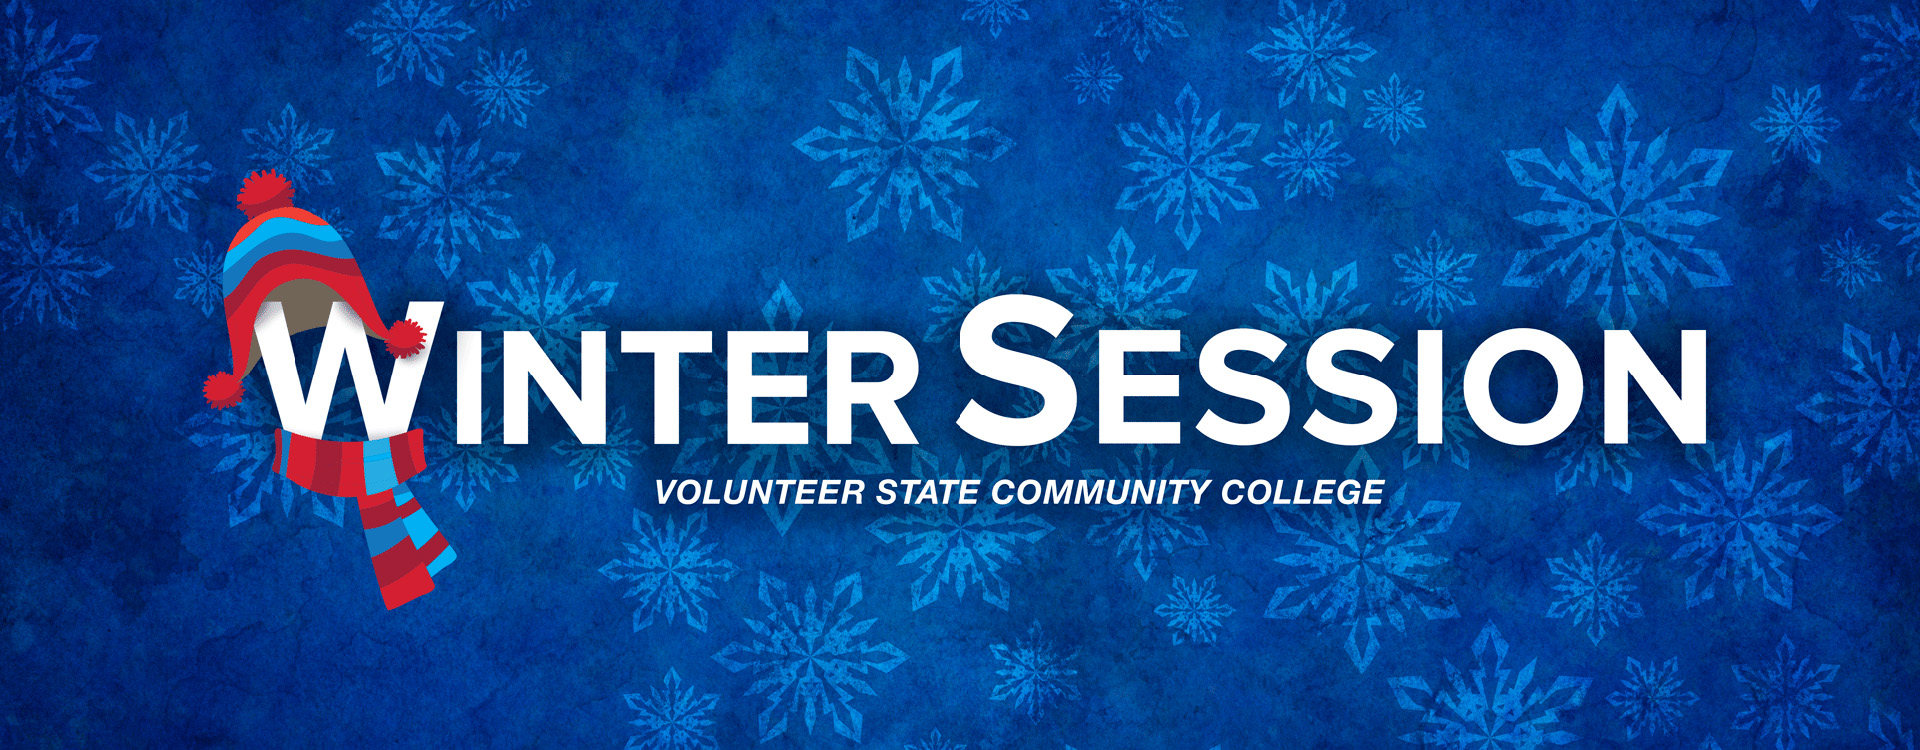 Vol state is offering a winter session